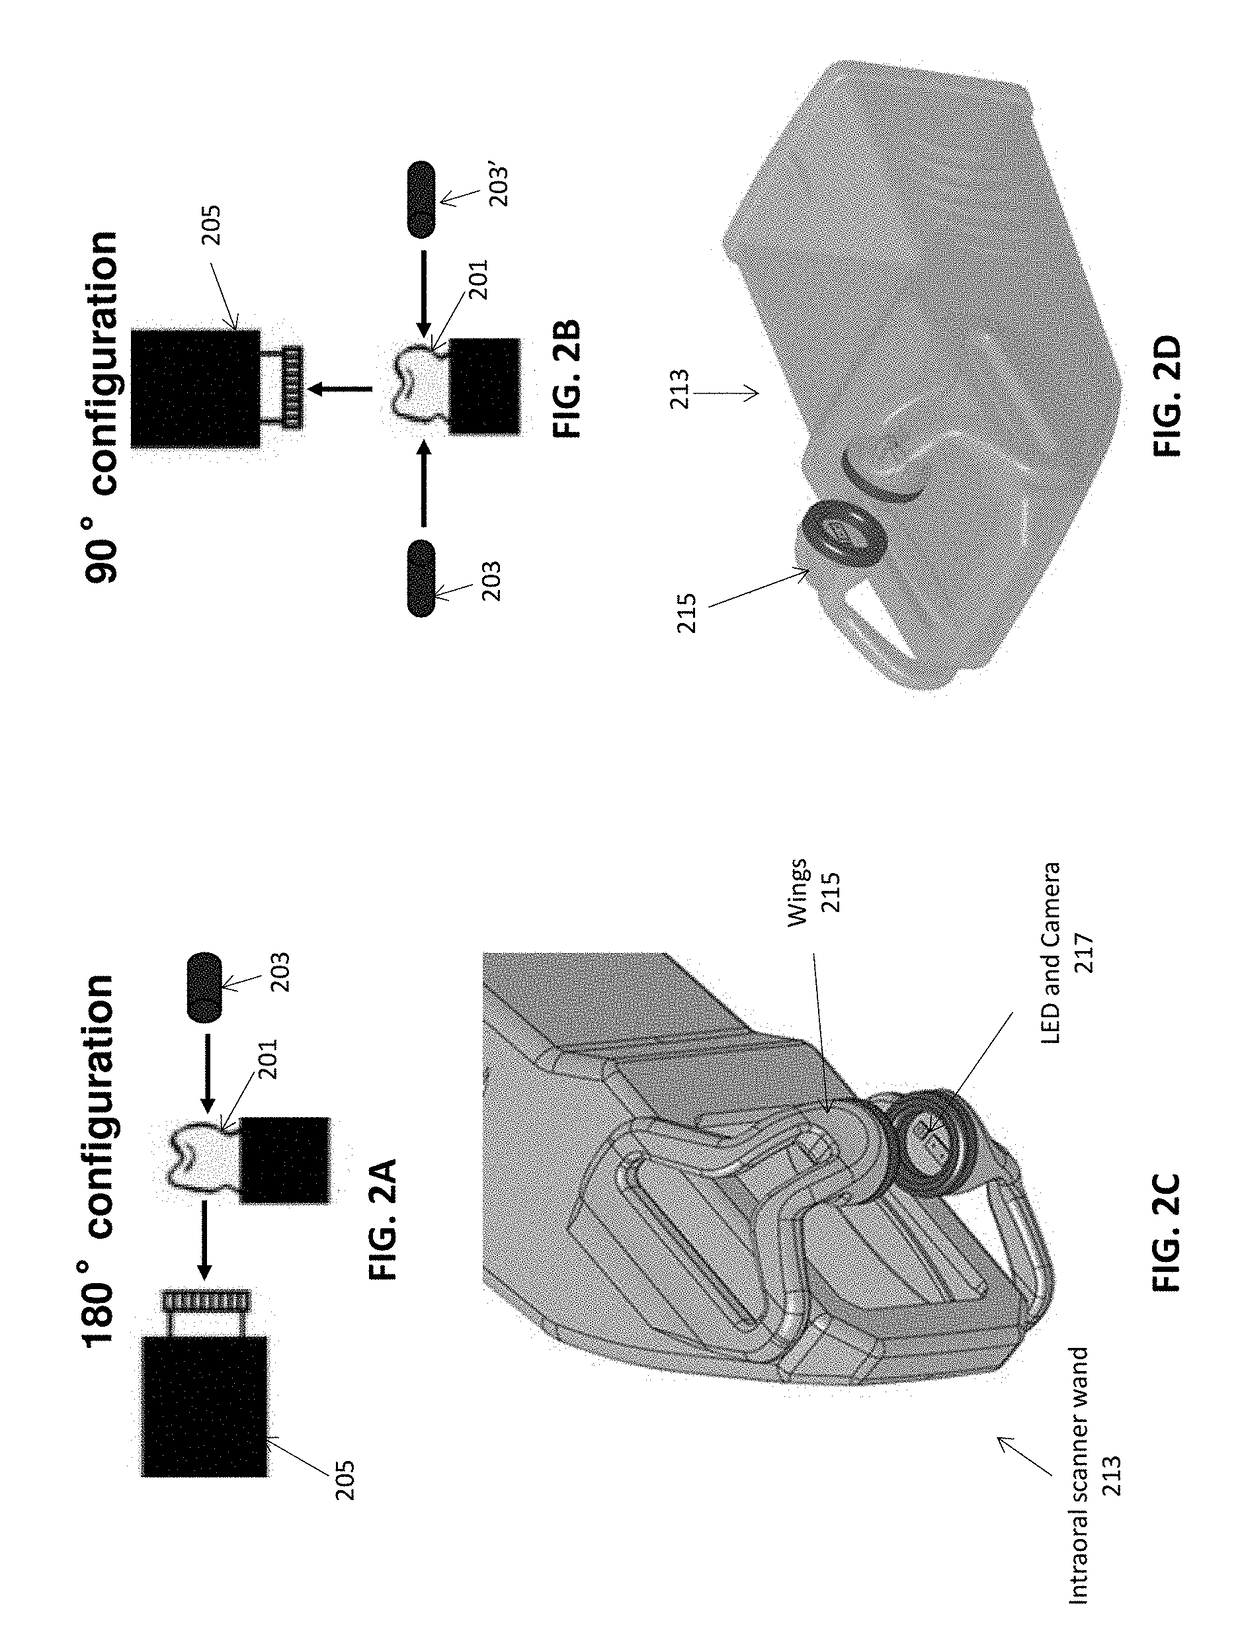 Intraoral scanner with dental diagnostics capabilities